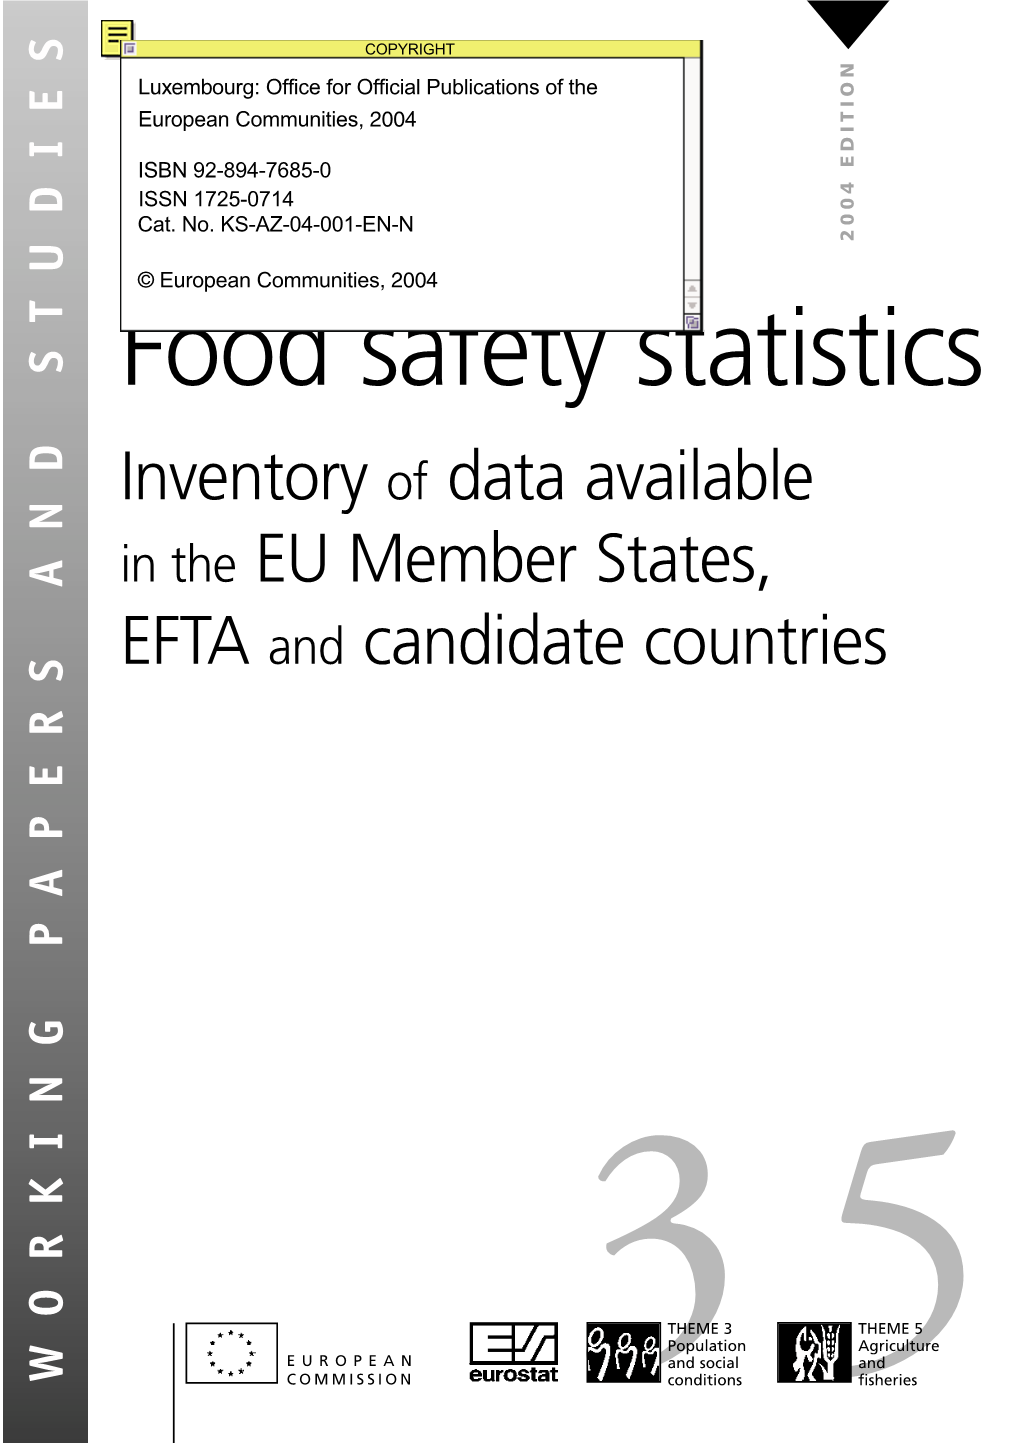 Food Safety Statistics Inventory of Data Available in the EU Member States, EFTA and Candidate Countries